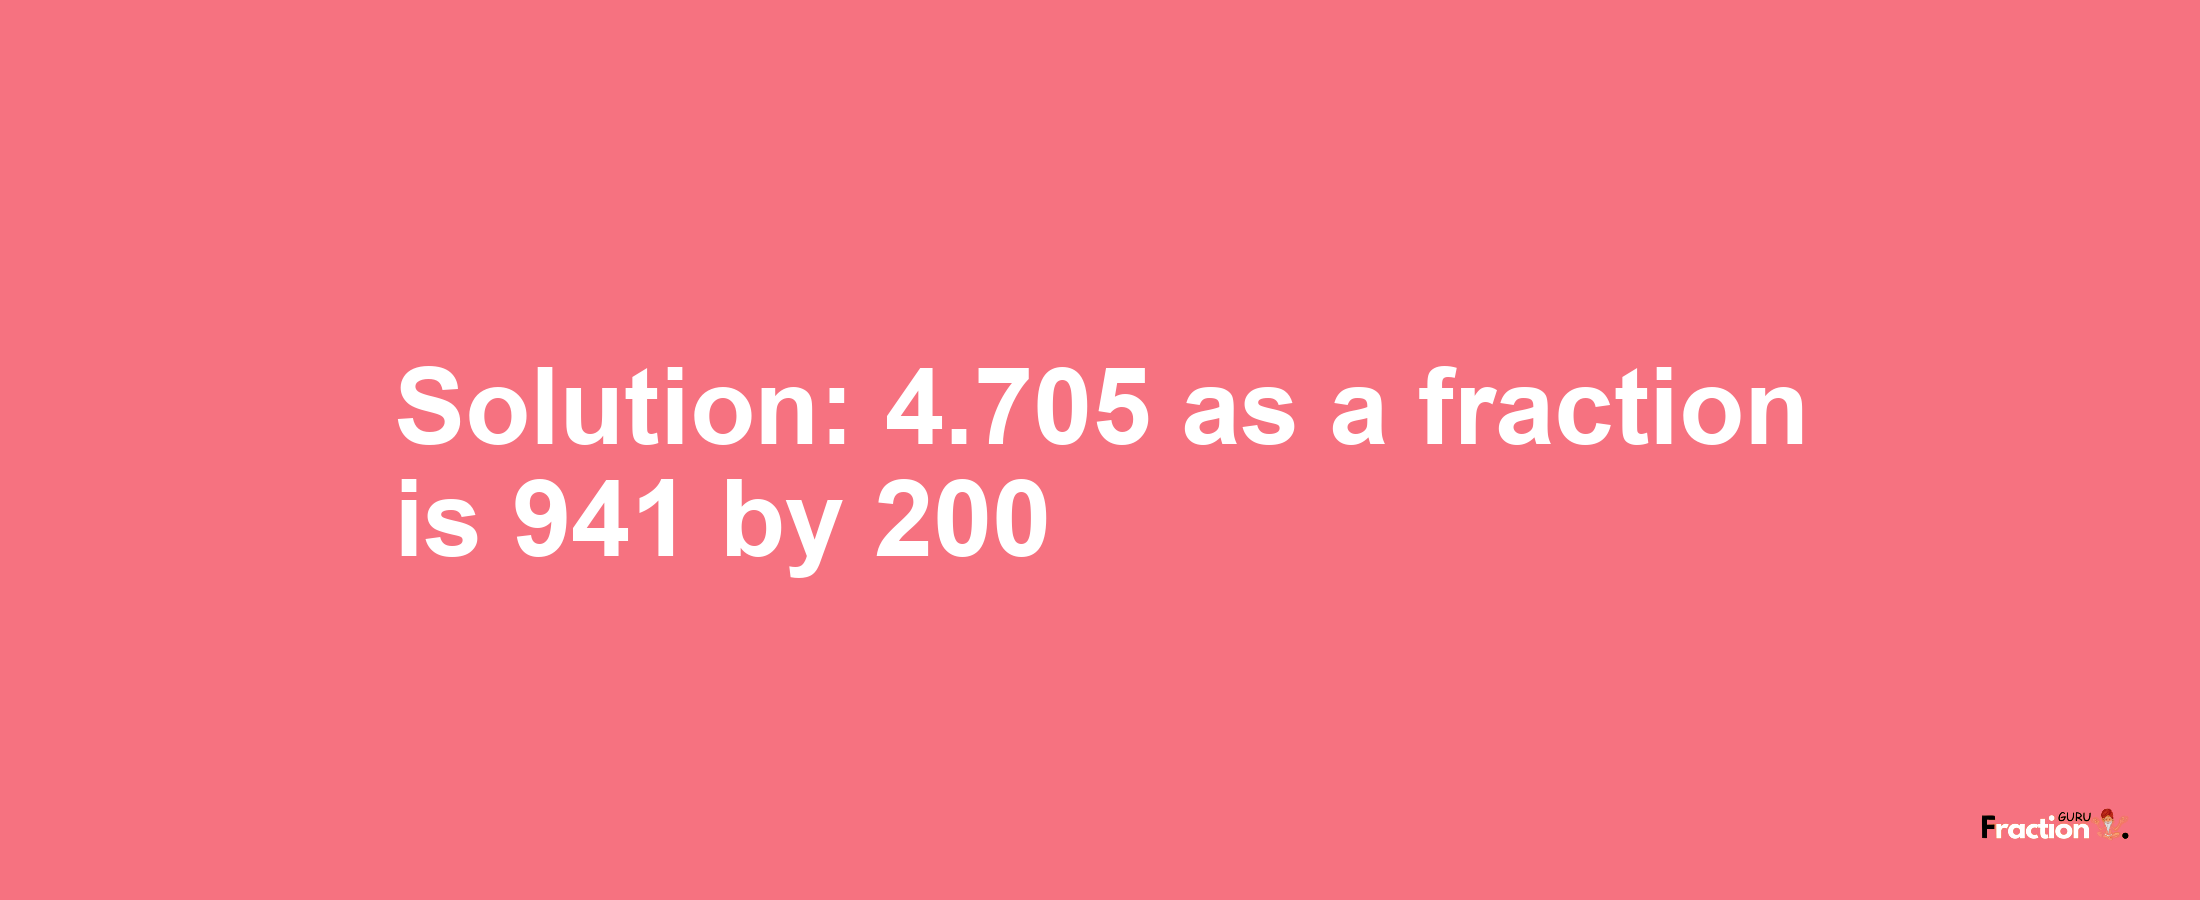 Solution:4.705 as a fraction is 941/200